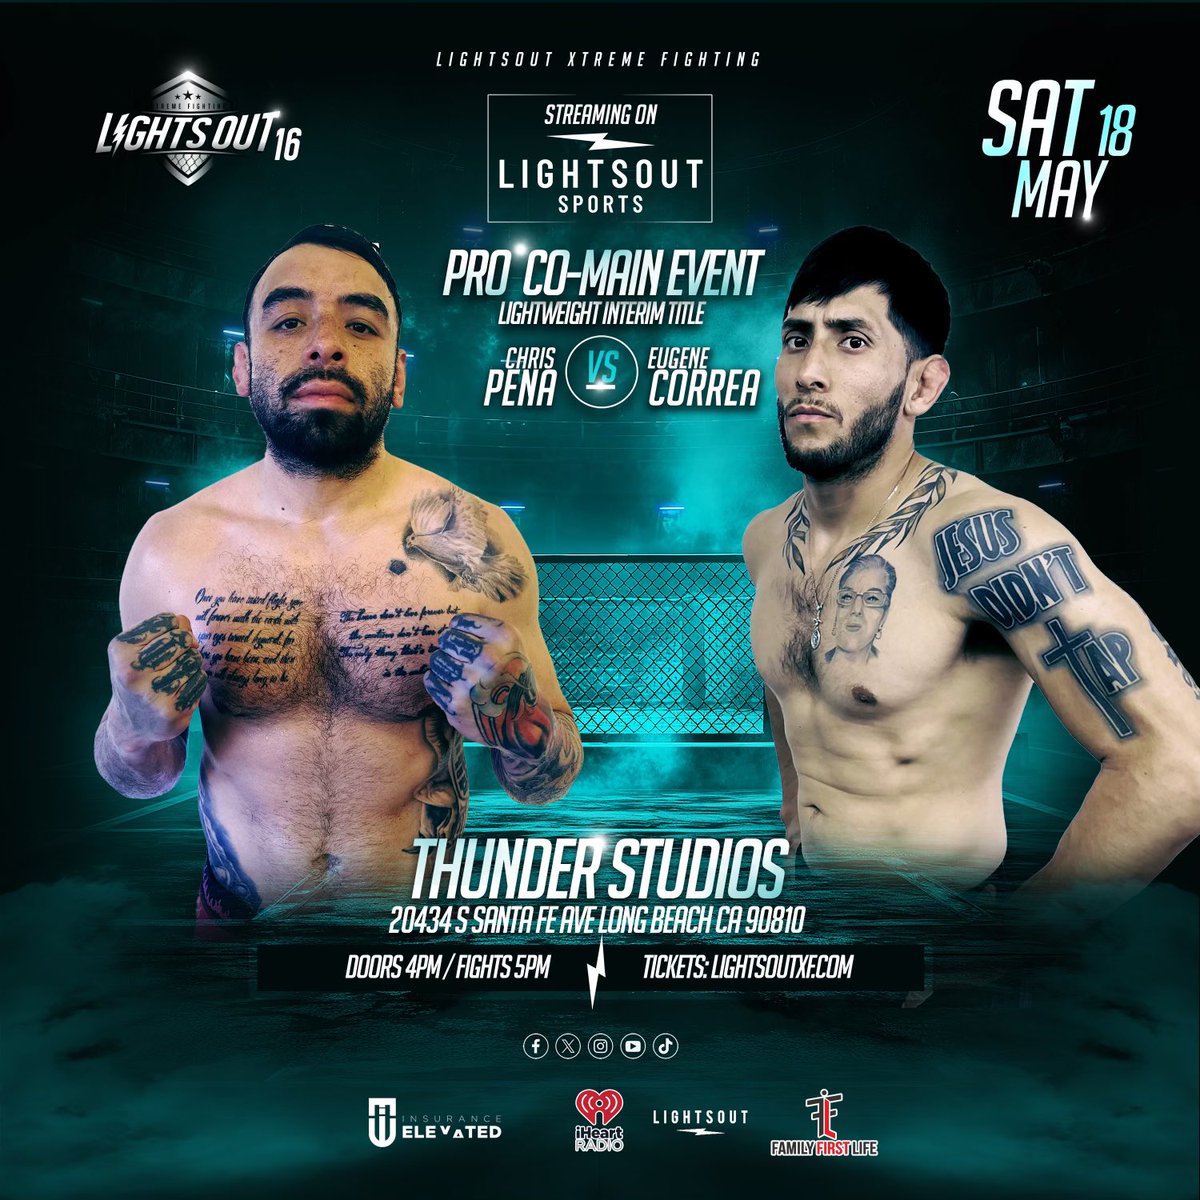 Bringing in Monday hot!!!! Our co main event features 2 local fighters as Cris Pena coming off a dominating performance on @LightsOutXF Vs Eugene Correa in a lightweight bout to unify the LXF interim lightweight title. May 18th in Long Beach, California streaming on